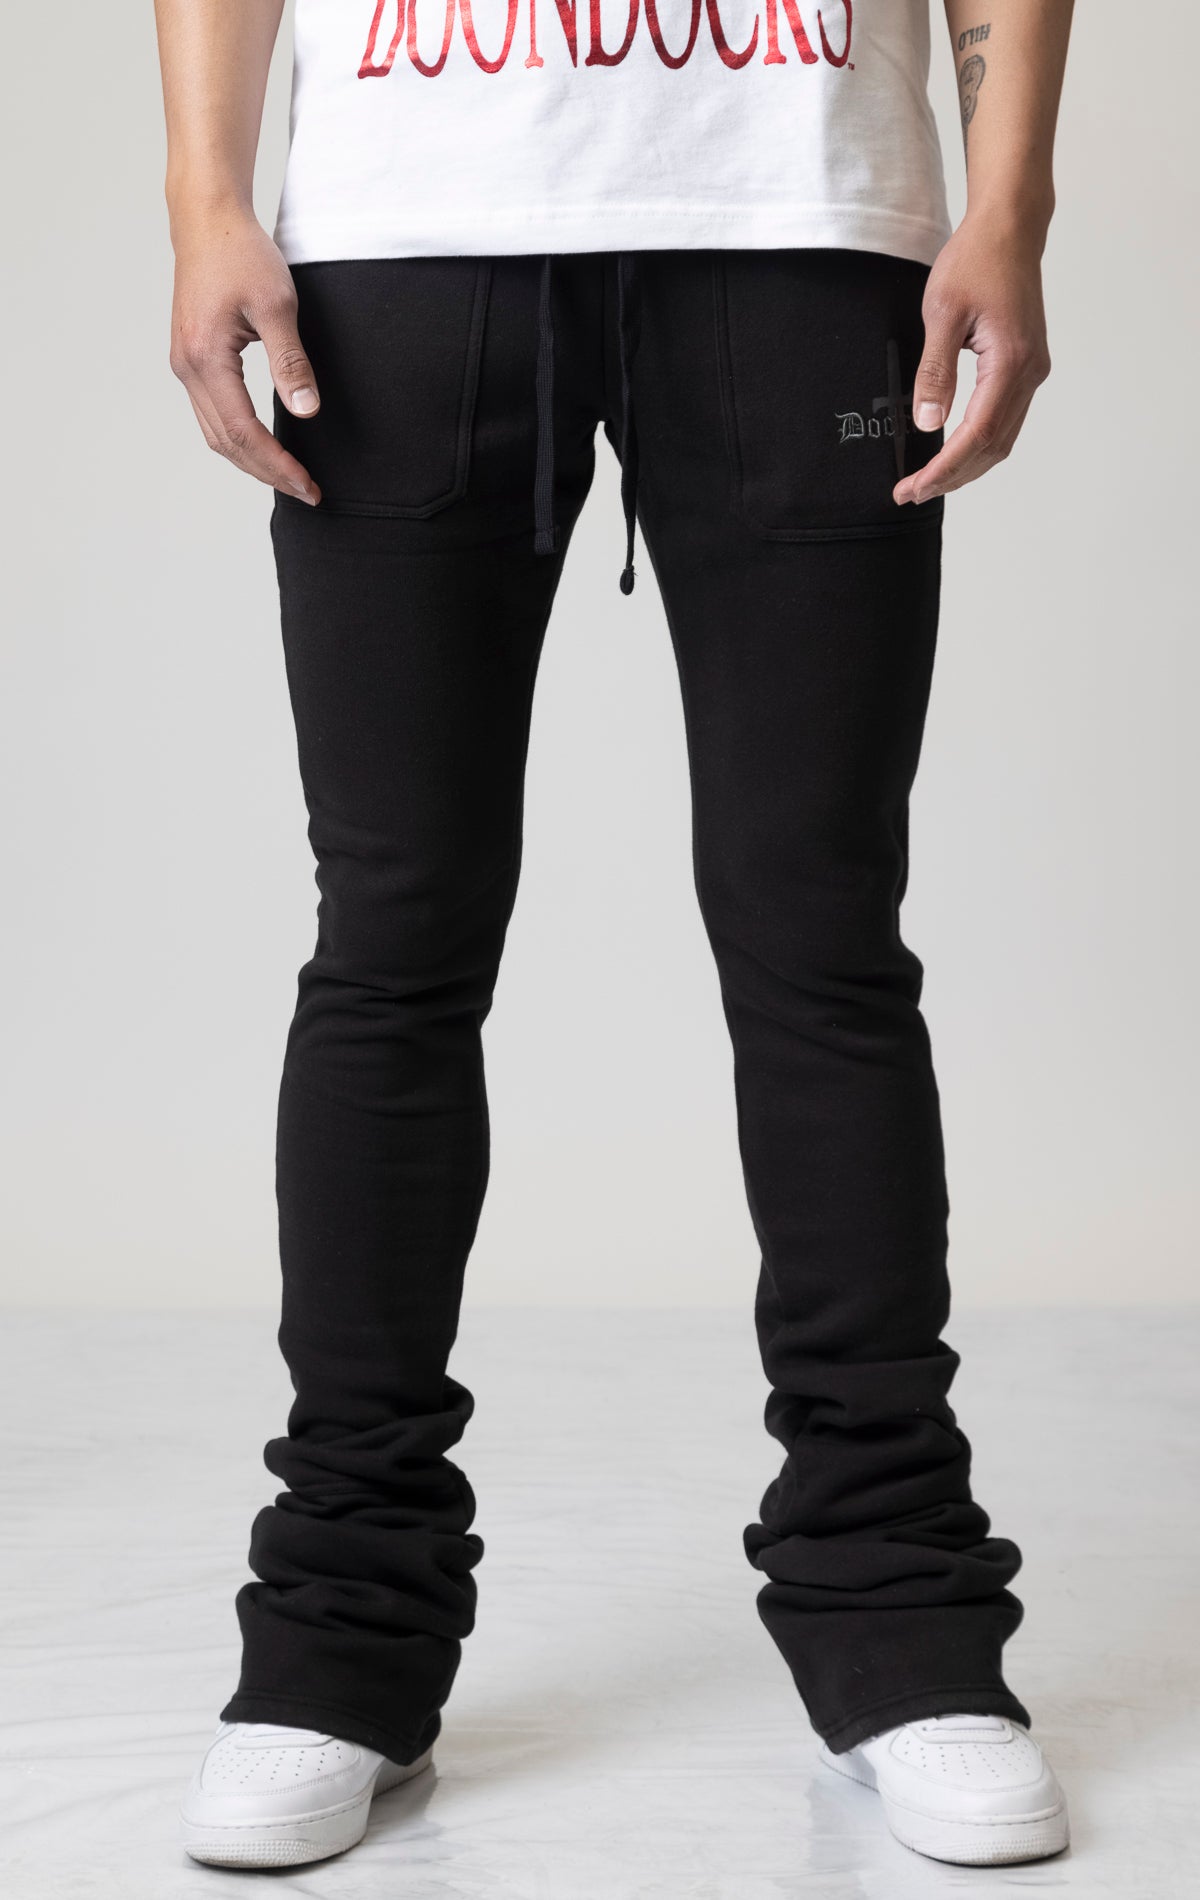 Black Core Dagger Super Stacked Joggers feature a unique, stacked leg design for a stylish look.  Subtle embroidered branding adds a touch of detail. The joggers are made from a comfortable blend of 80% cotton and 20% polyester for all-day wear. An elastic waistband and pockets offer both convenience and functionality.